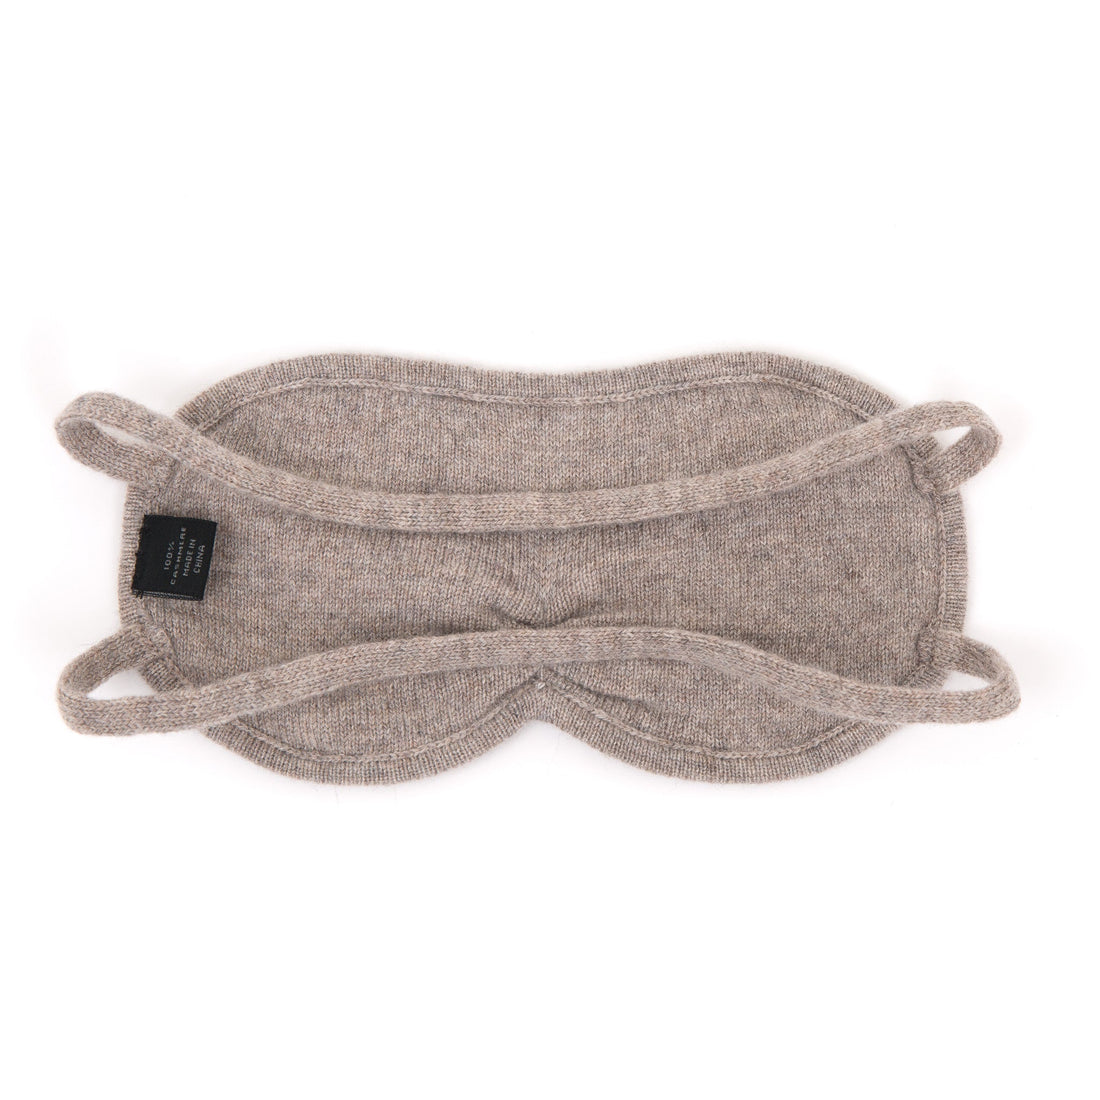 HOME - Lights Out Cashmere Eye Mask